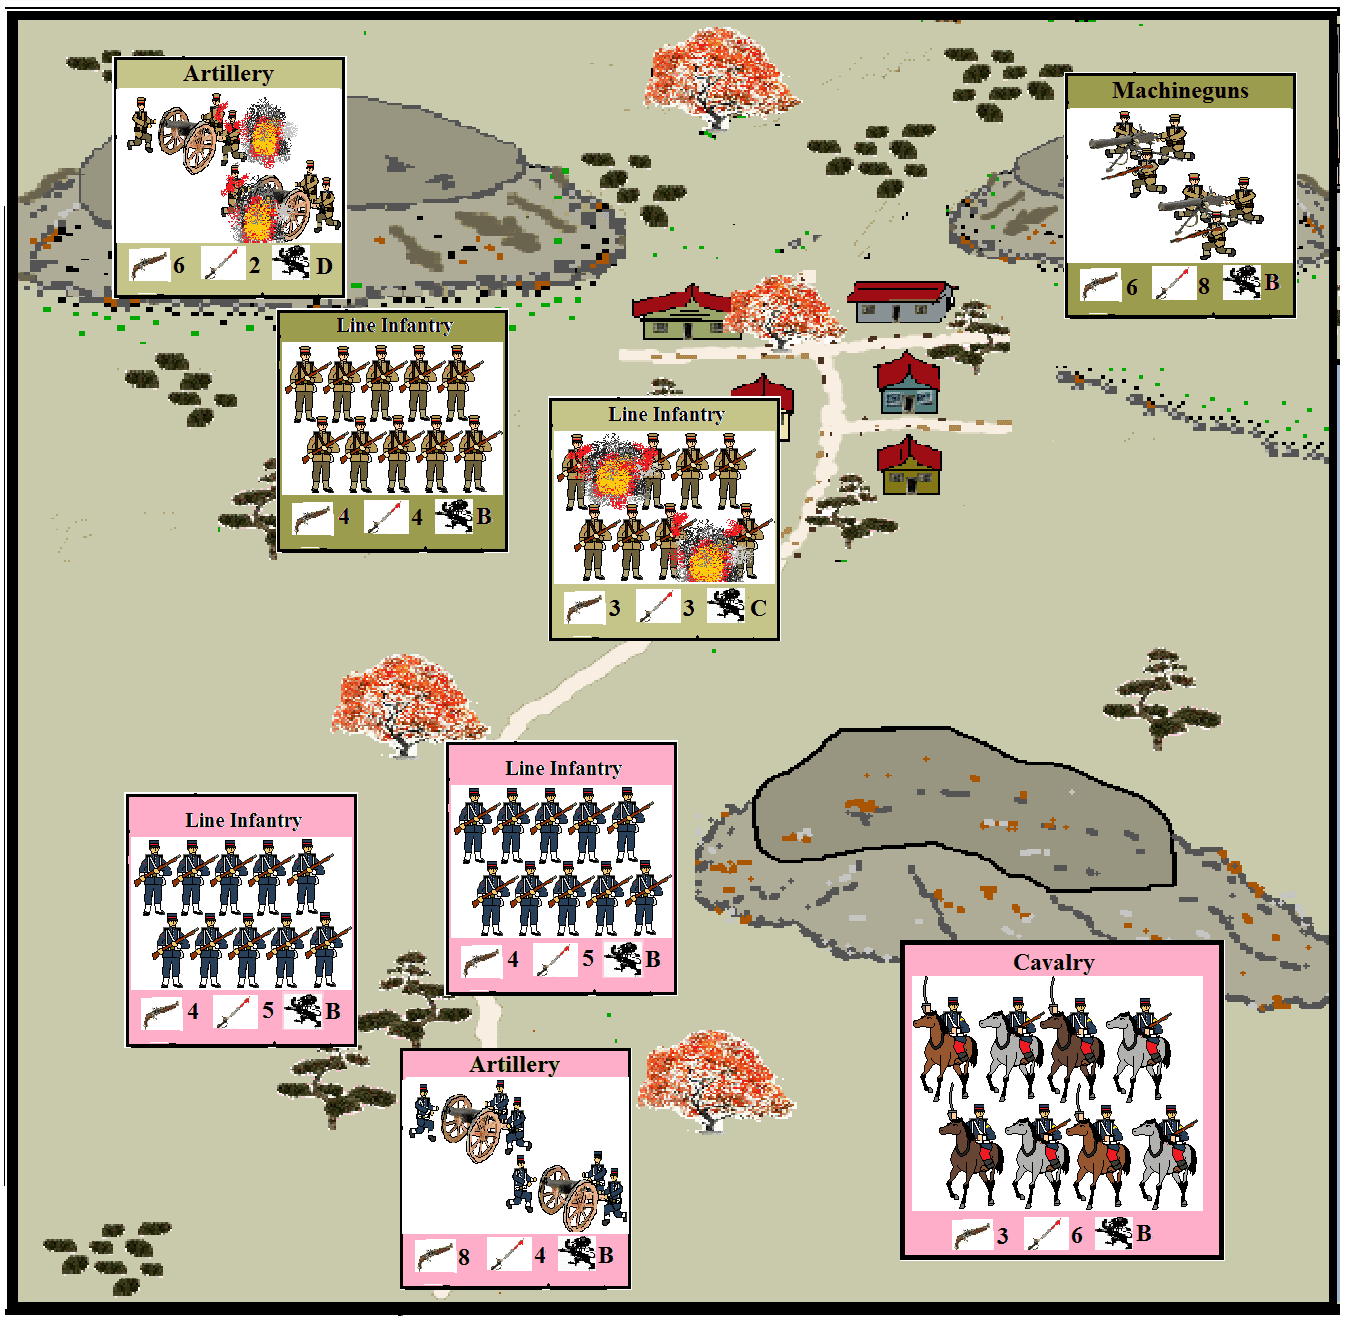 Manchuria Ablaze: A Solitiare Game of the Russo-Japanese War